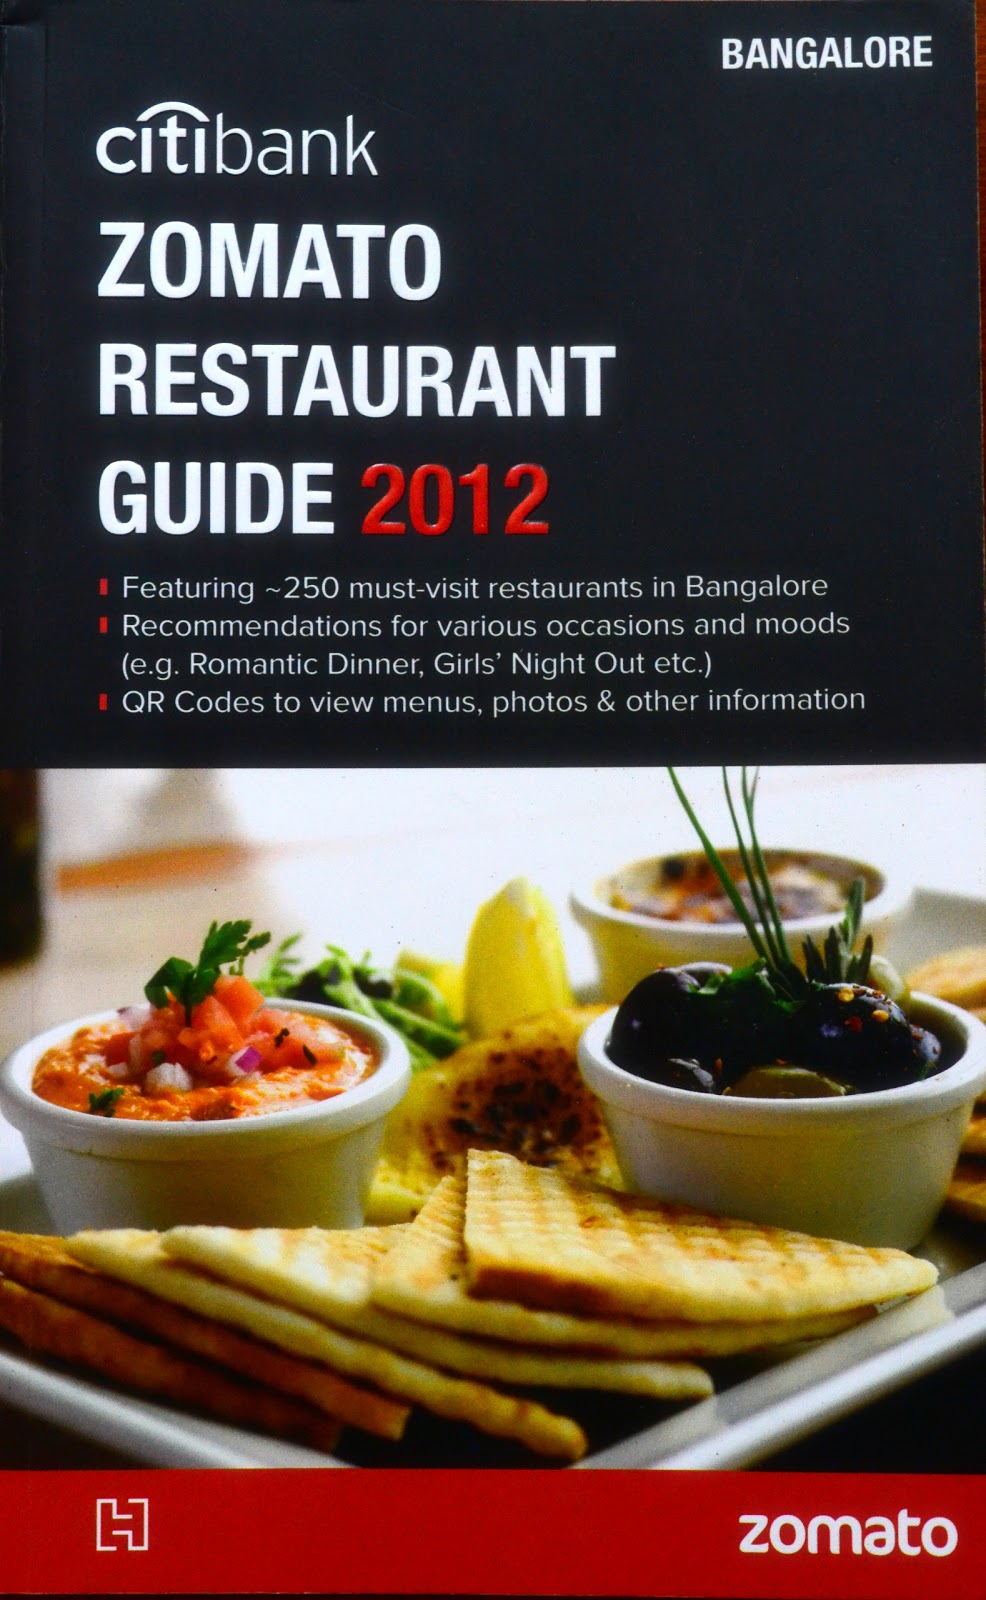 Simple and Yummy Recipes: Review : Zomato Restaurant Guide 2012